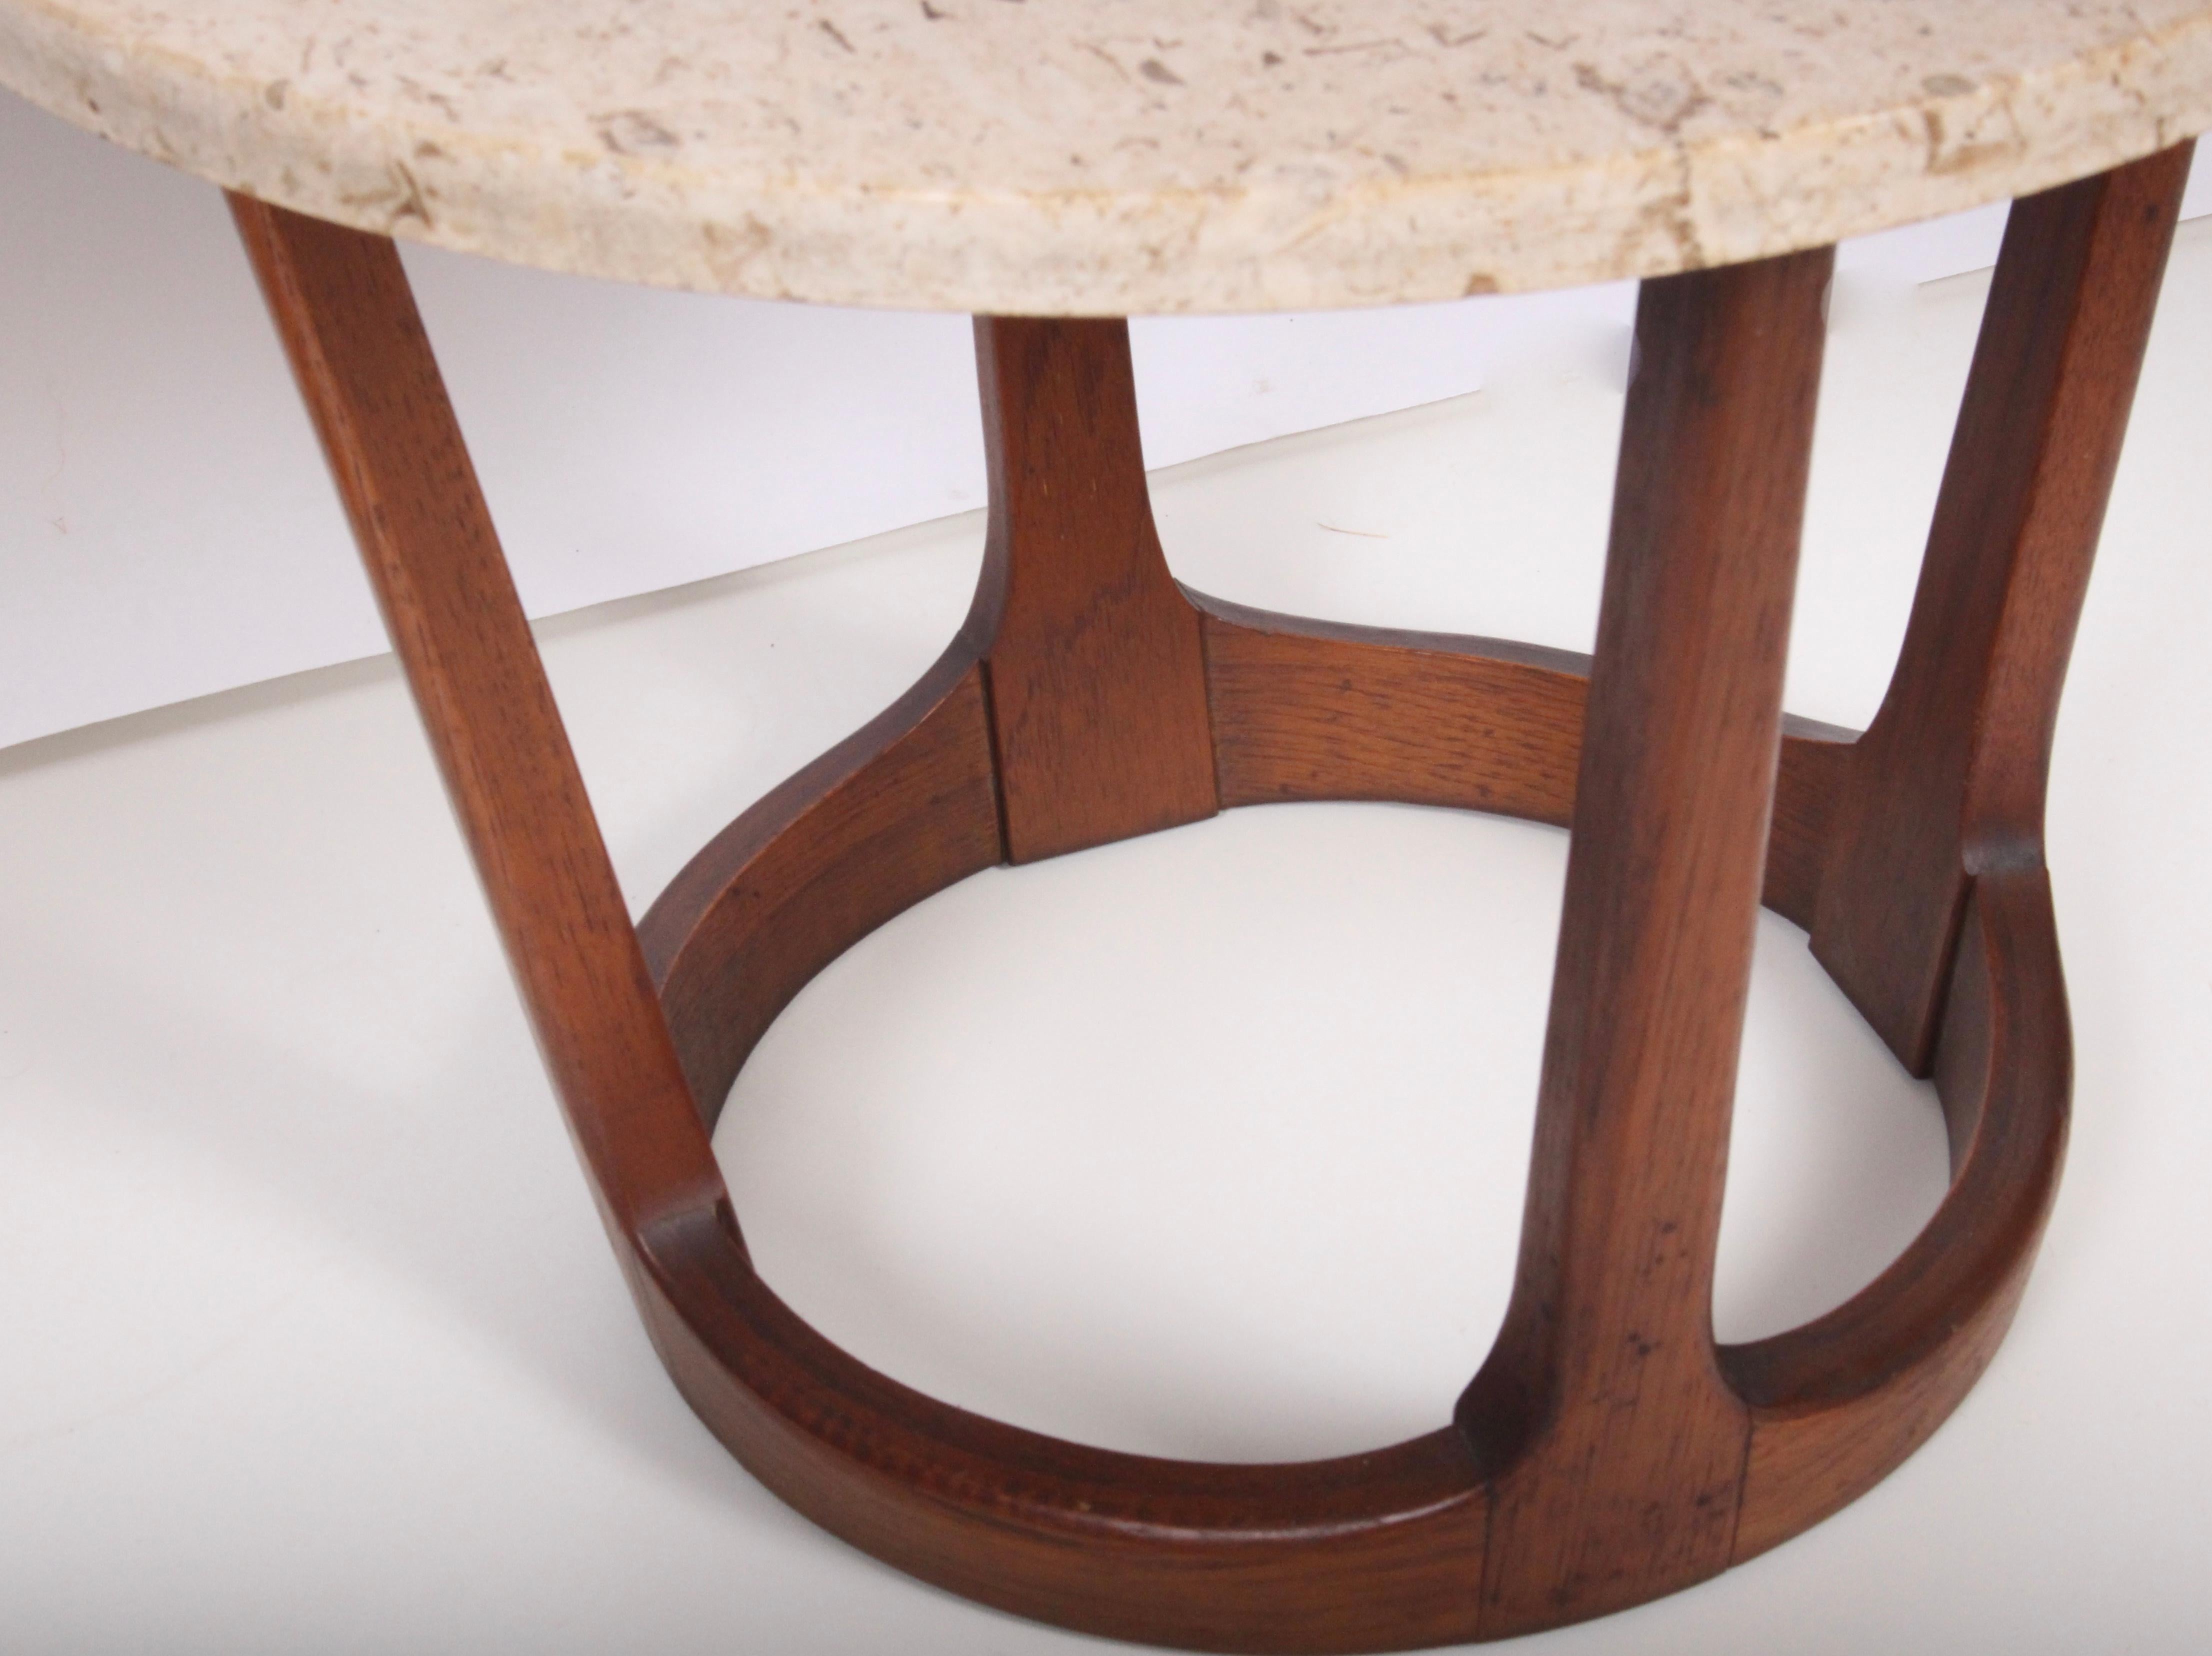 Pair of Lane American Mid-Century Modern Walnut and Round Travertine End Tables 1